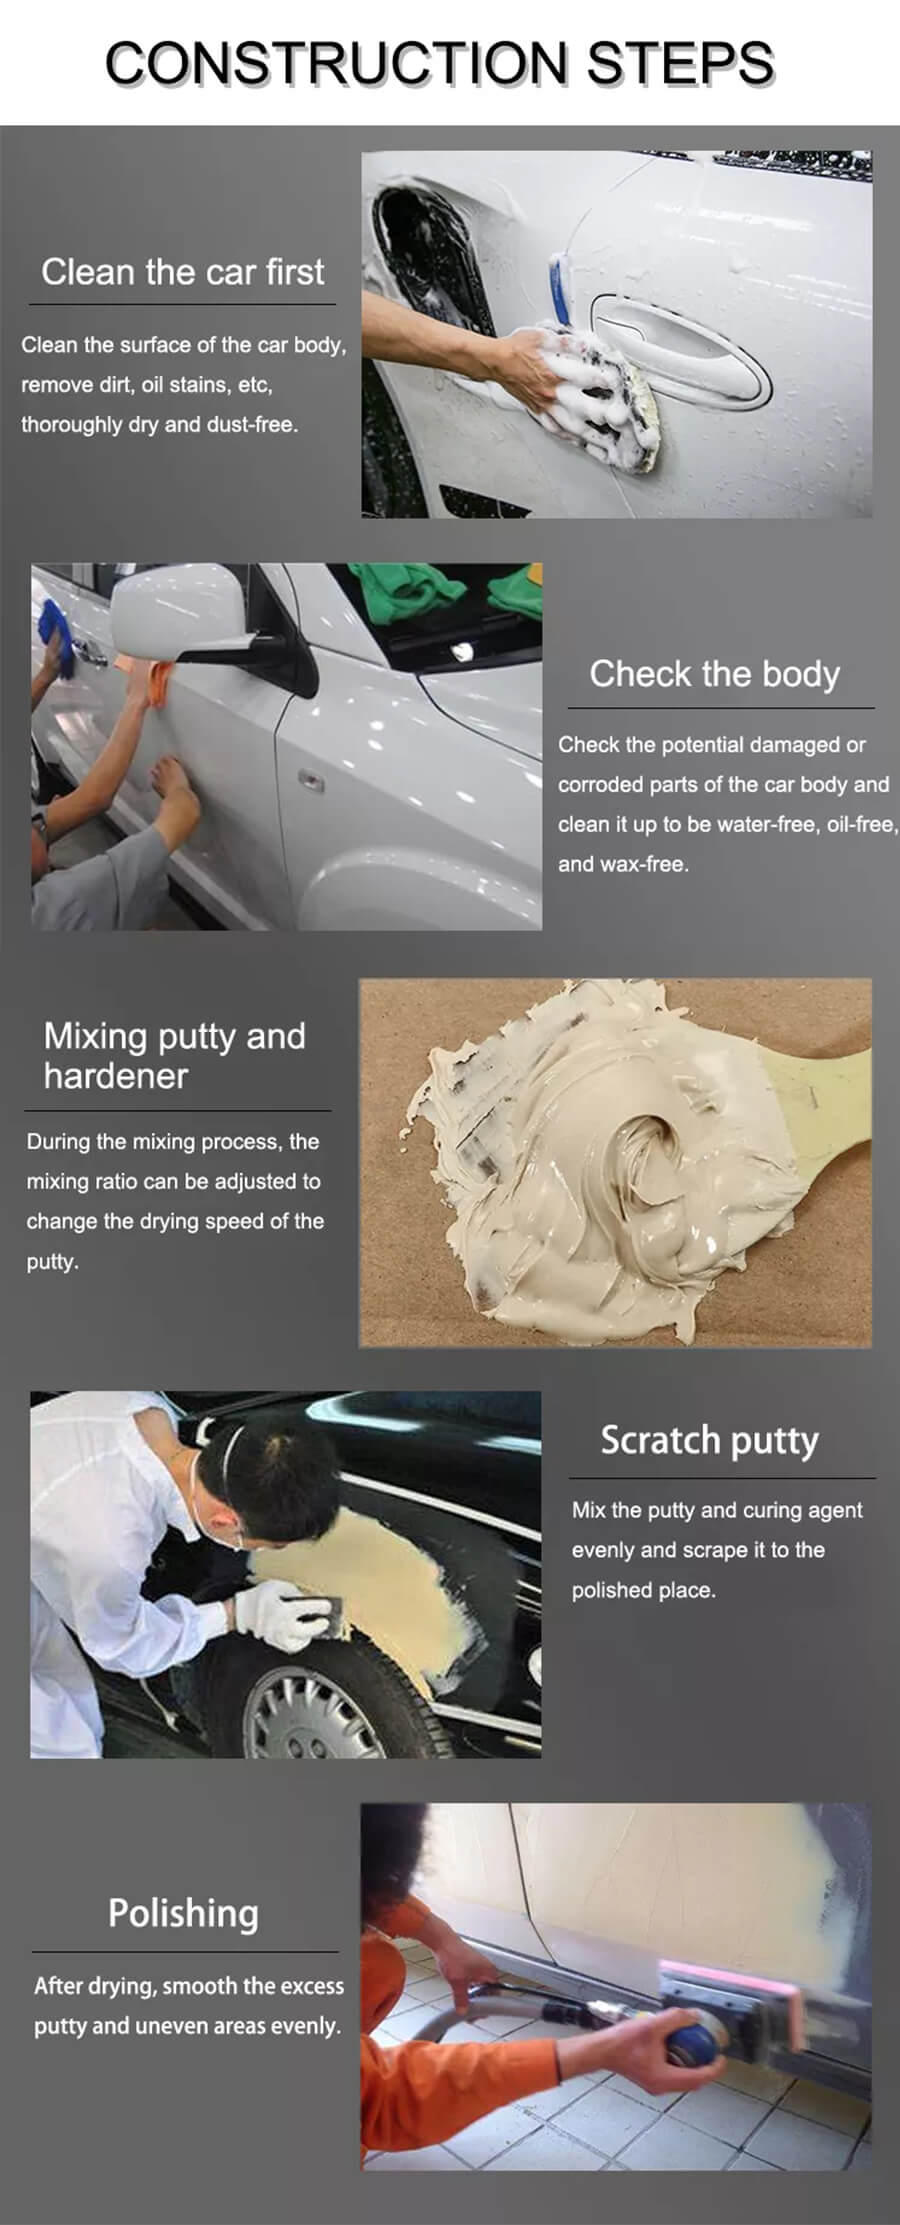 HK014 White BPO Carputty Automotive Body Repair Filler - SYBON Professional  Car Paint Manufacturer in China